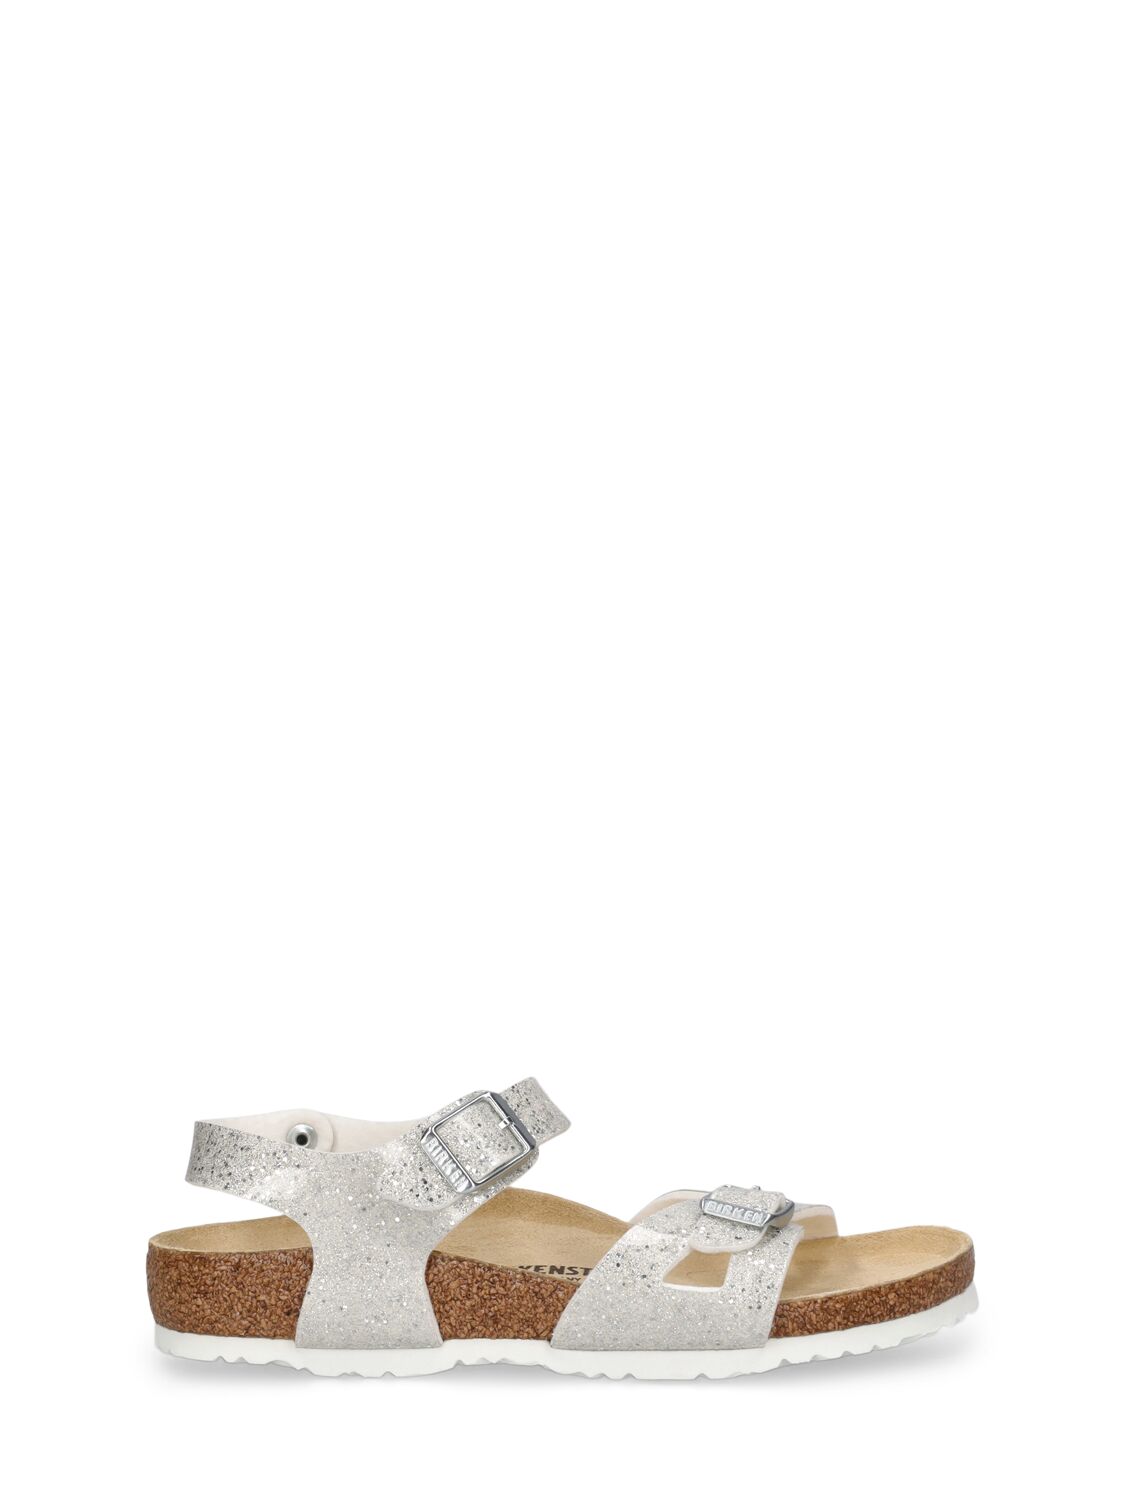 Image of Glittered Rio Faux Leather Sandals